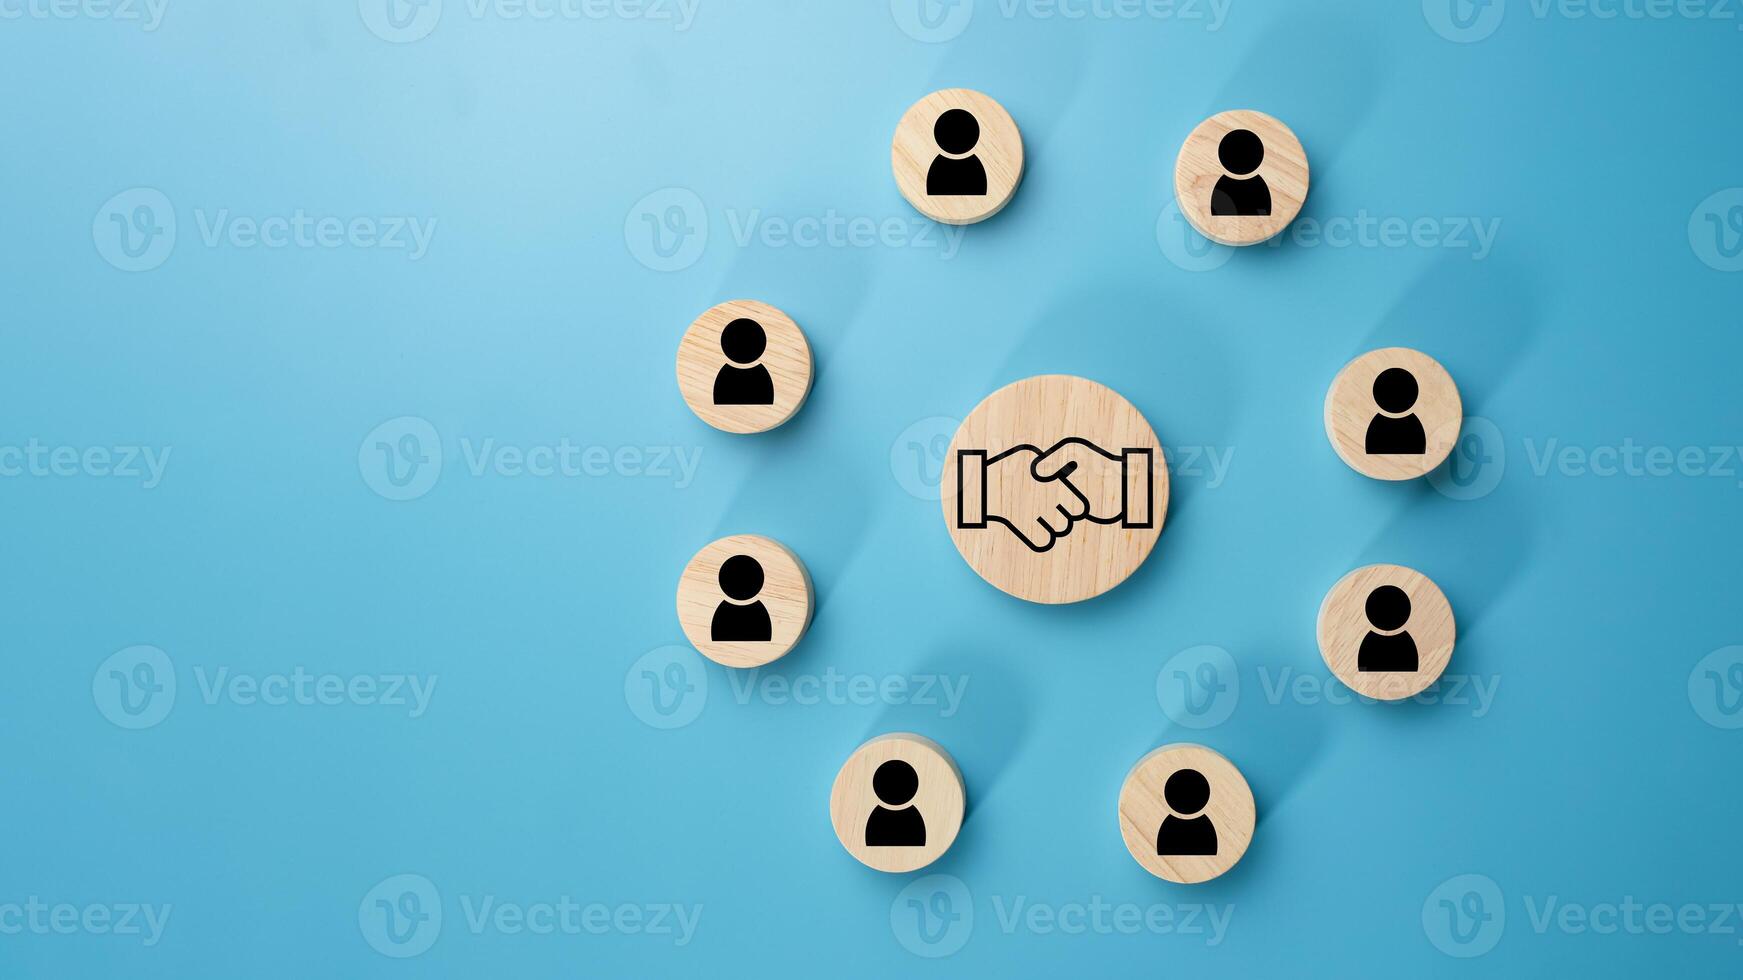 Team management concept, Human resources, Recruitment concept, HRM administration or human resource management concept, The handshake icon in a circular wooden board placed on a light blue background. photo